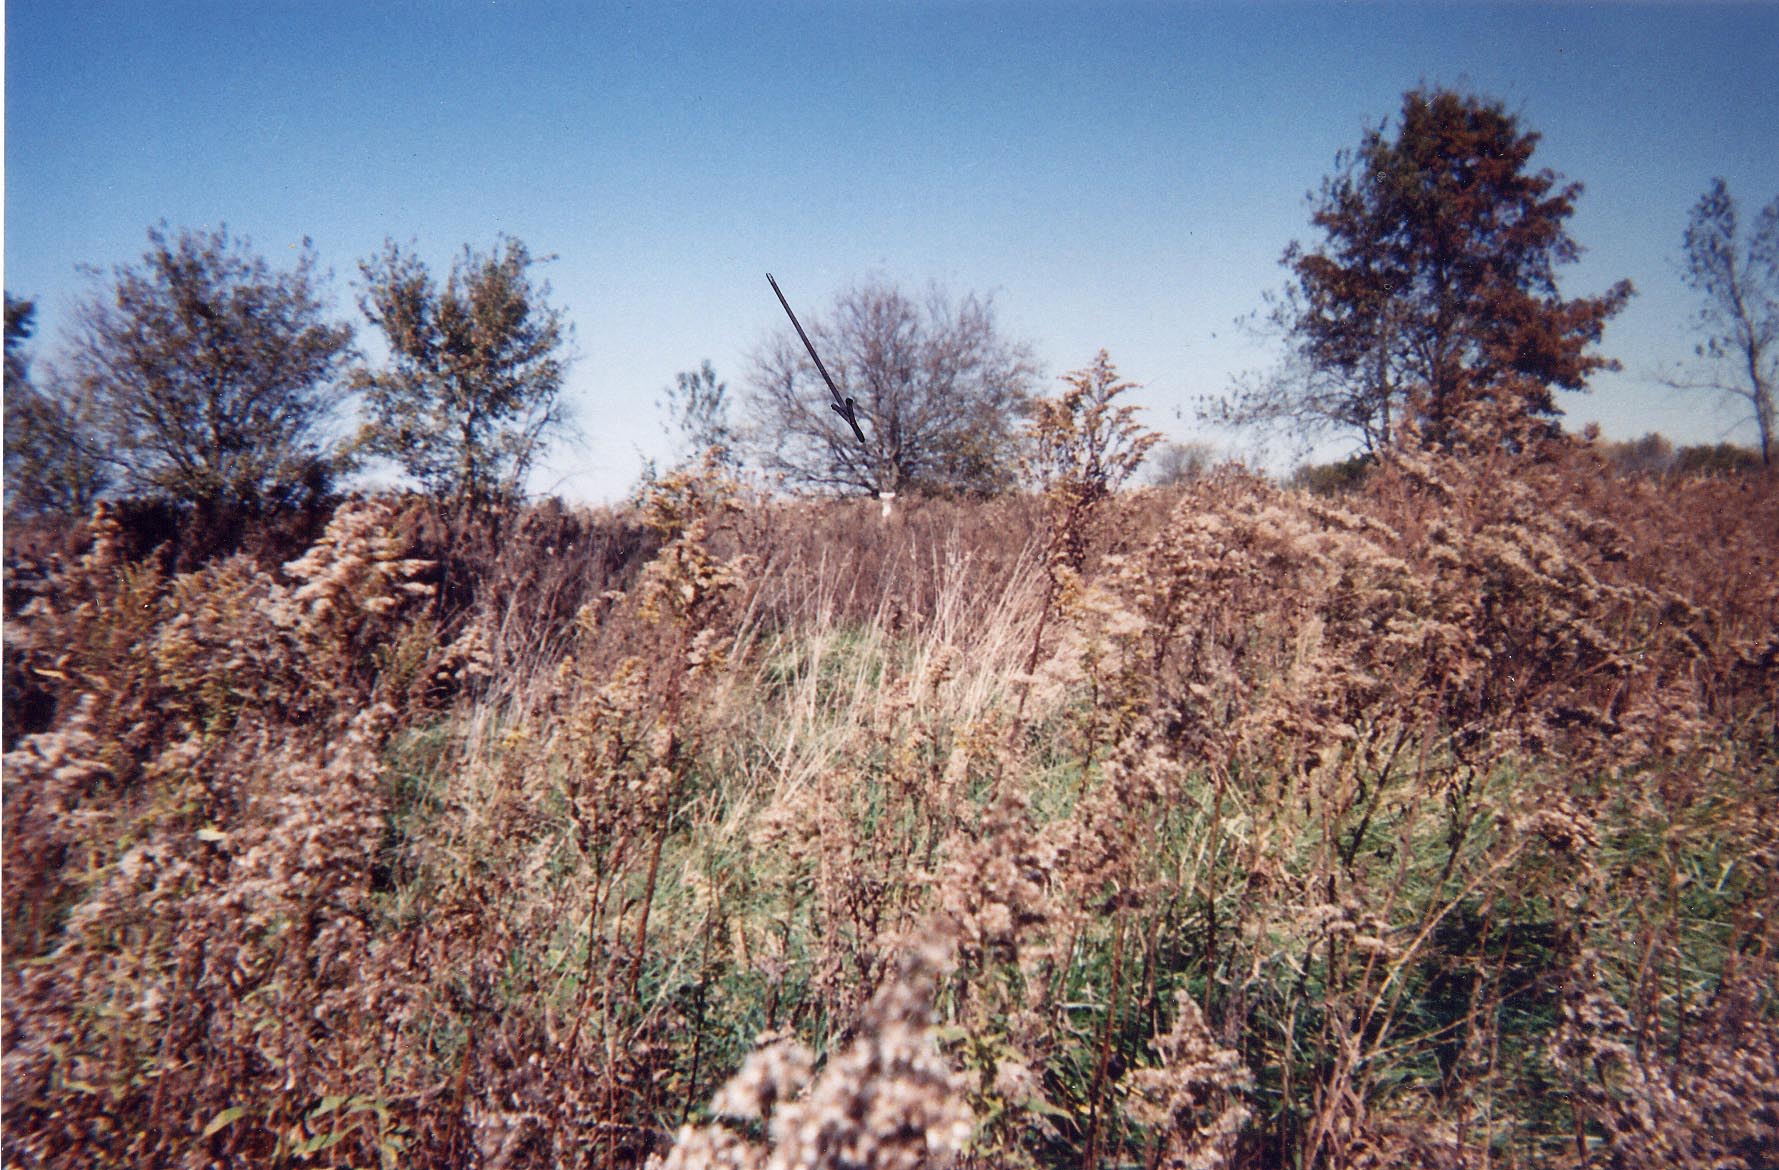 Another view showing the deplorable condition of the cemetery in 1998. 